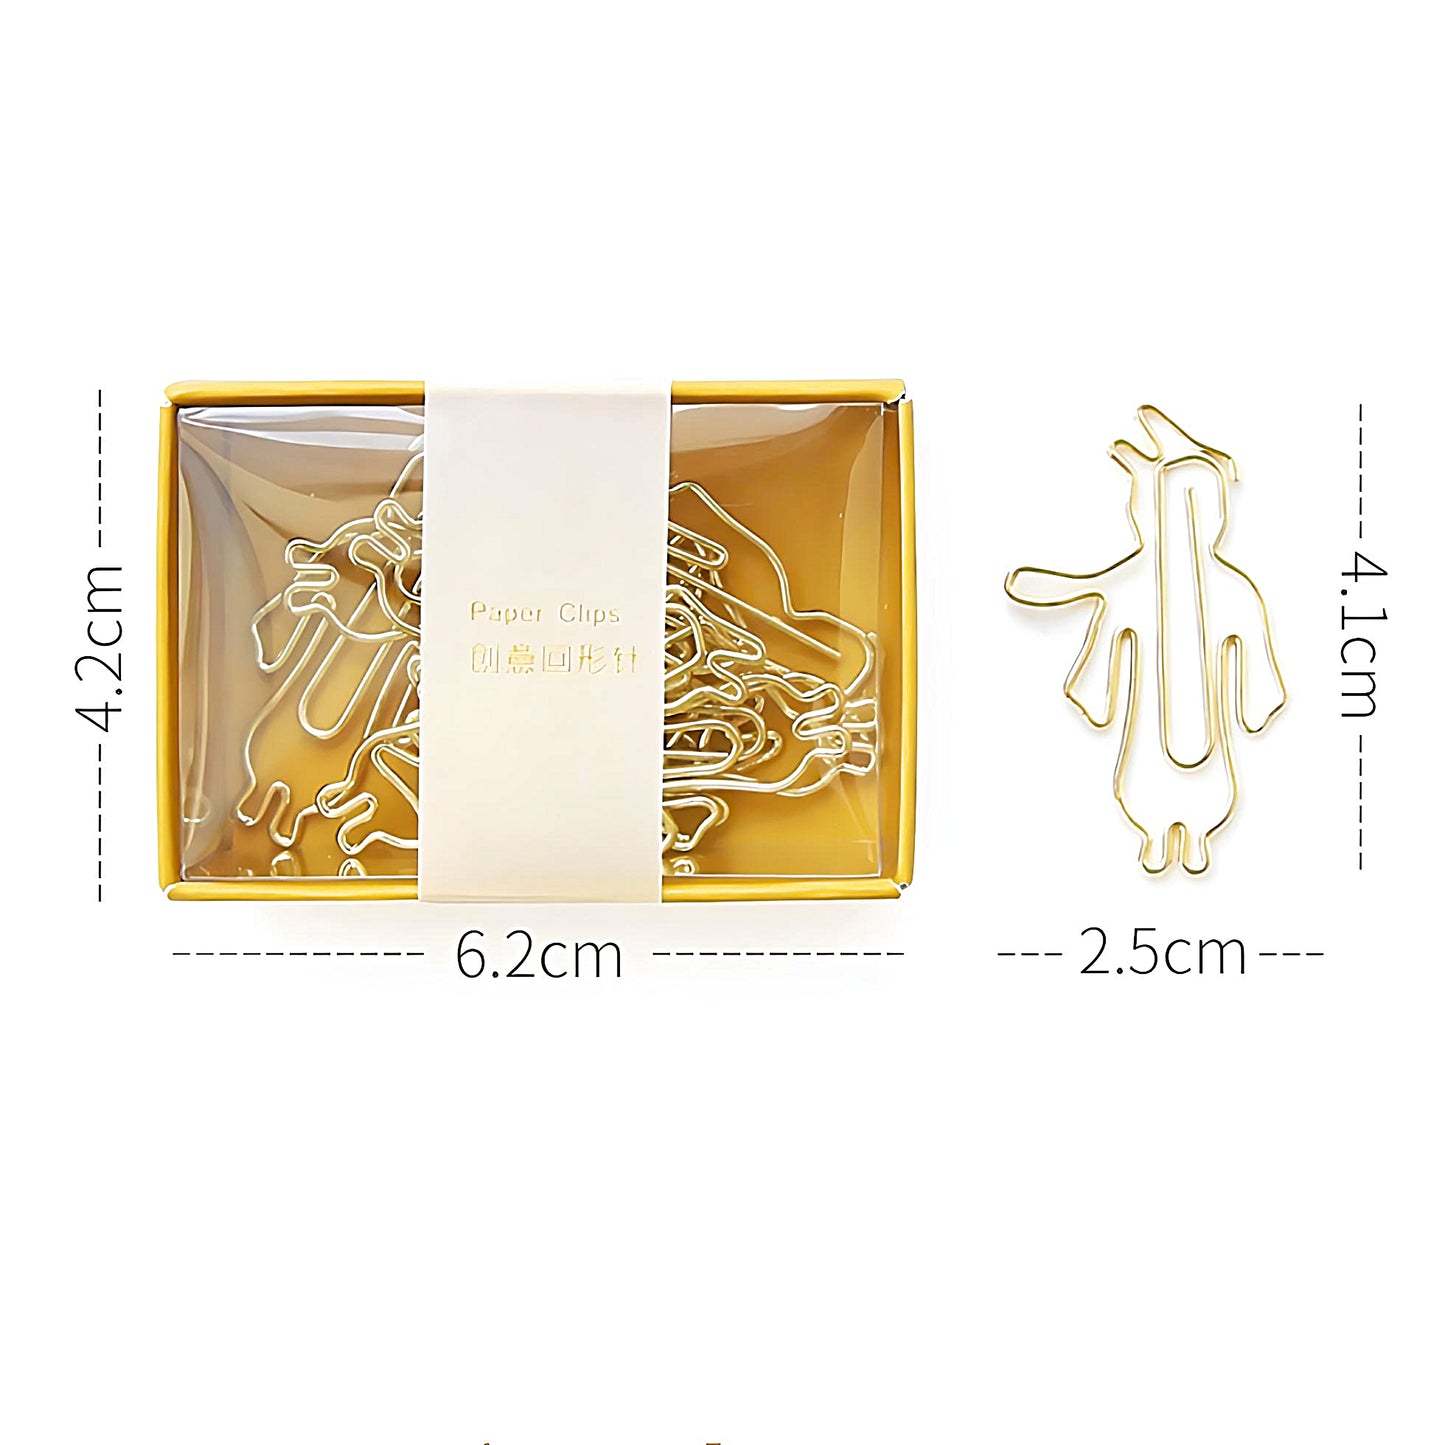 a set of 8 metal paper clips in the shape of Little Prince